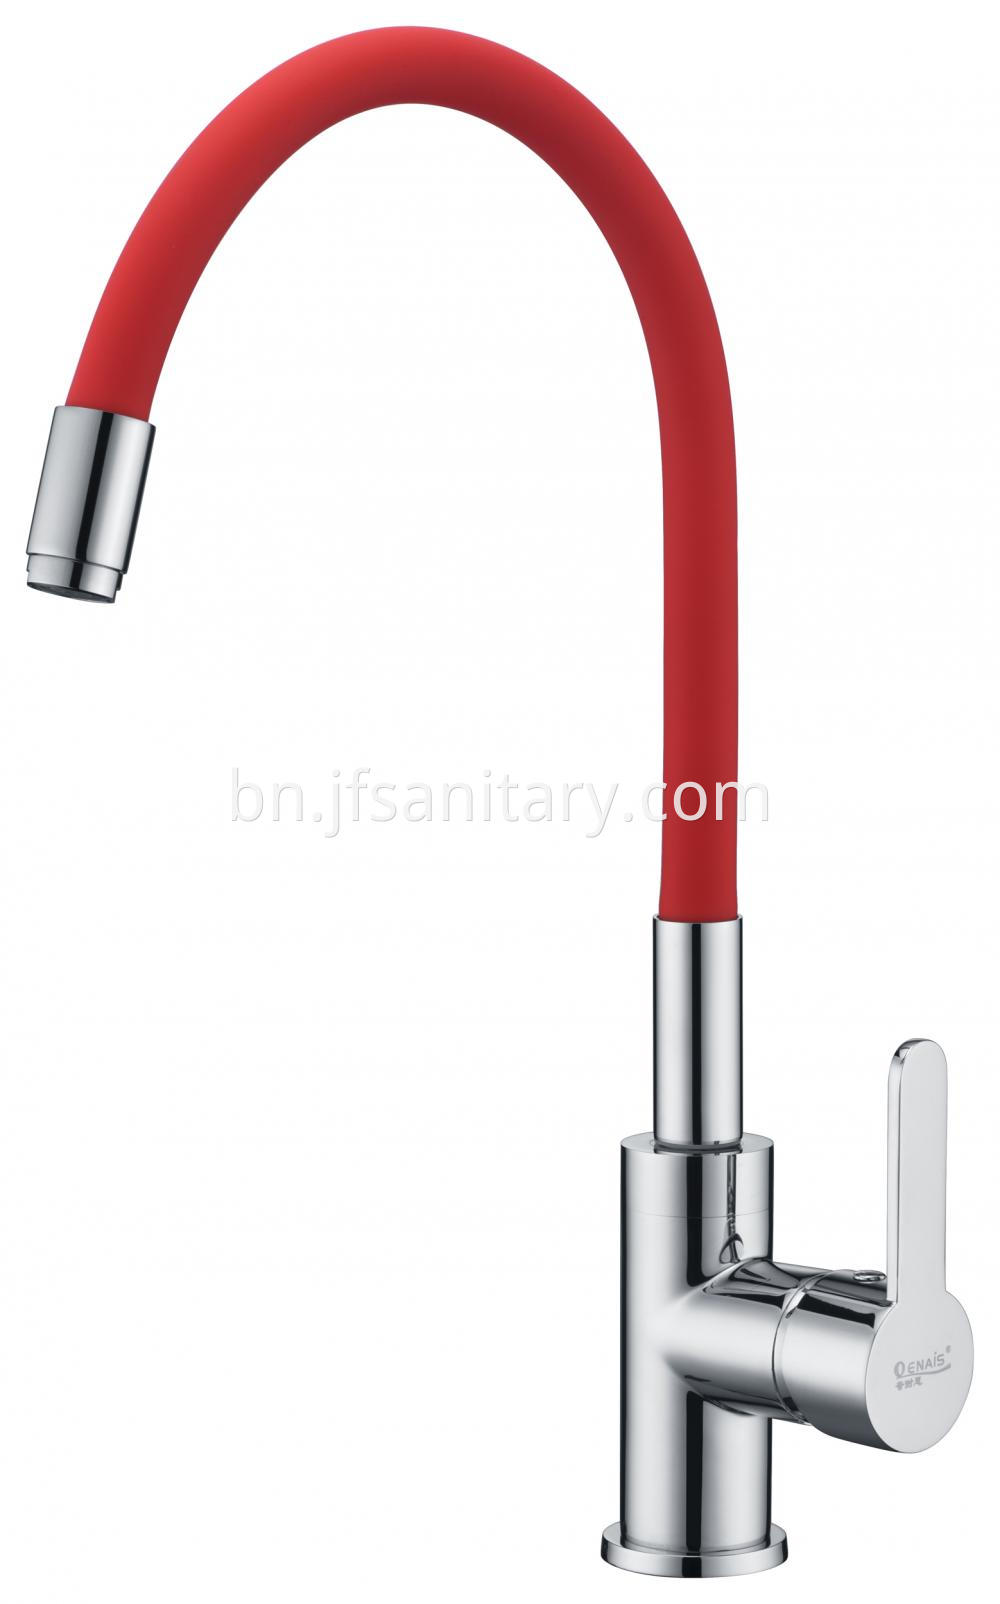 Modern Kitchen Sink Tap With Red Rubber